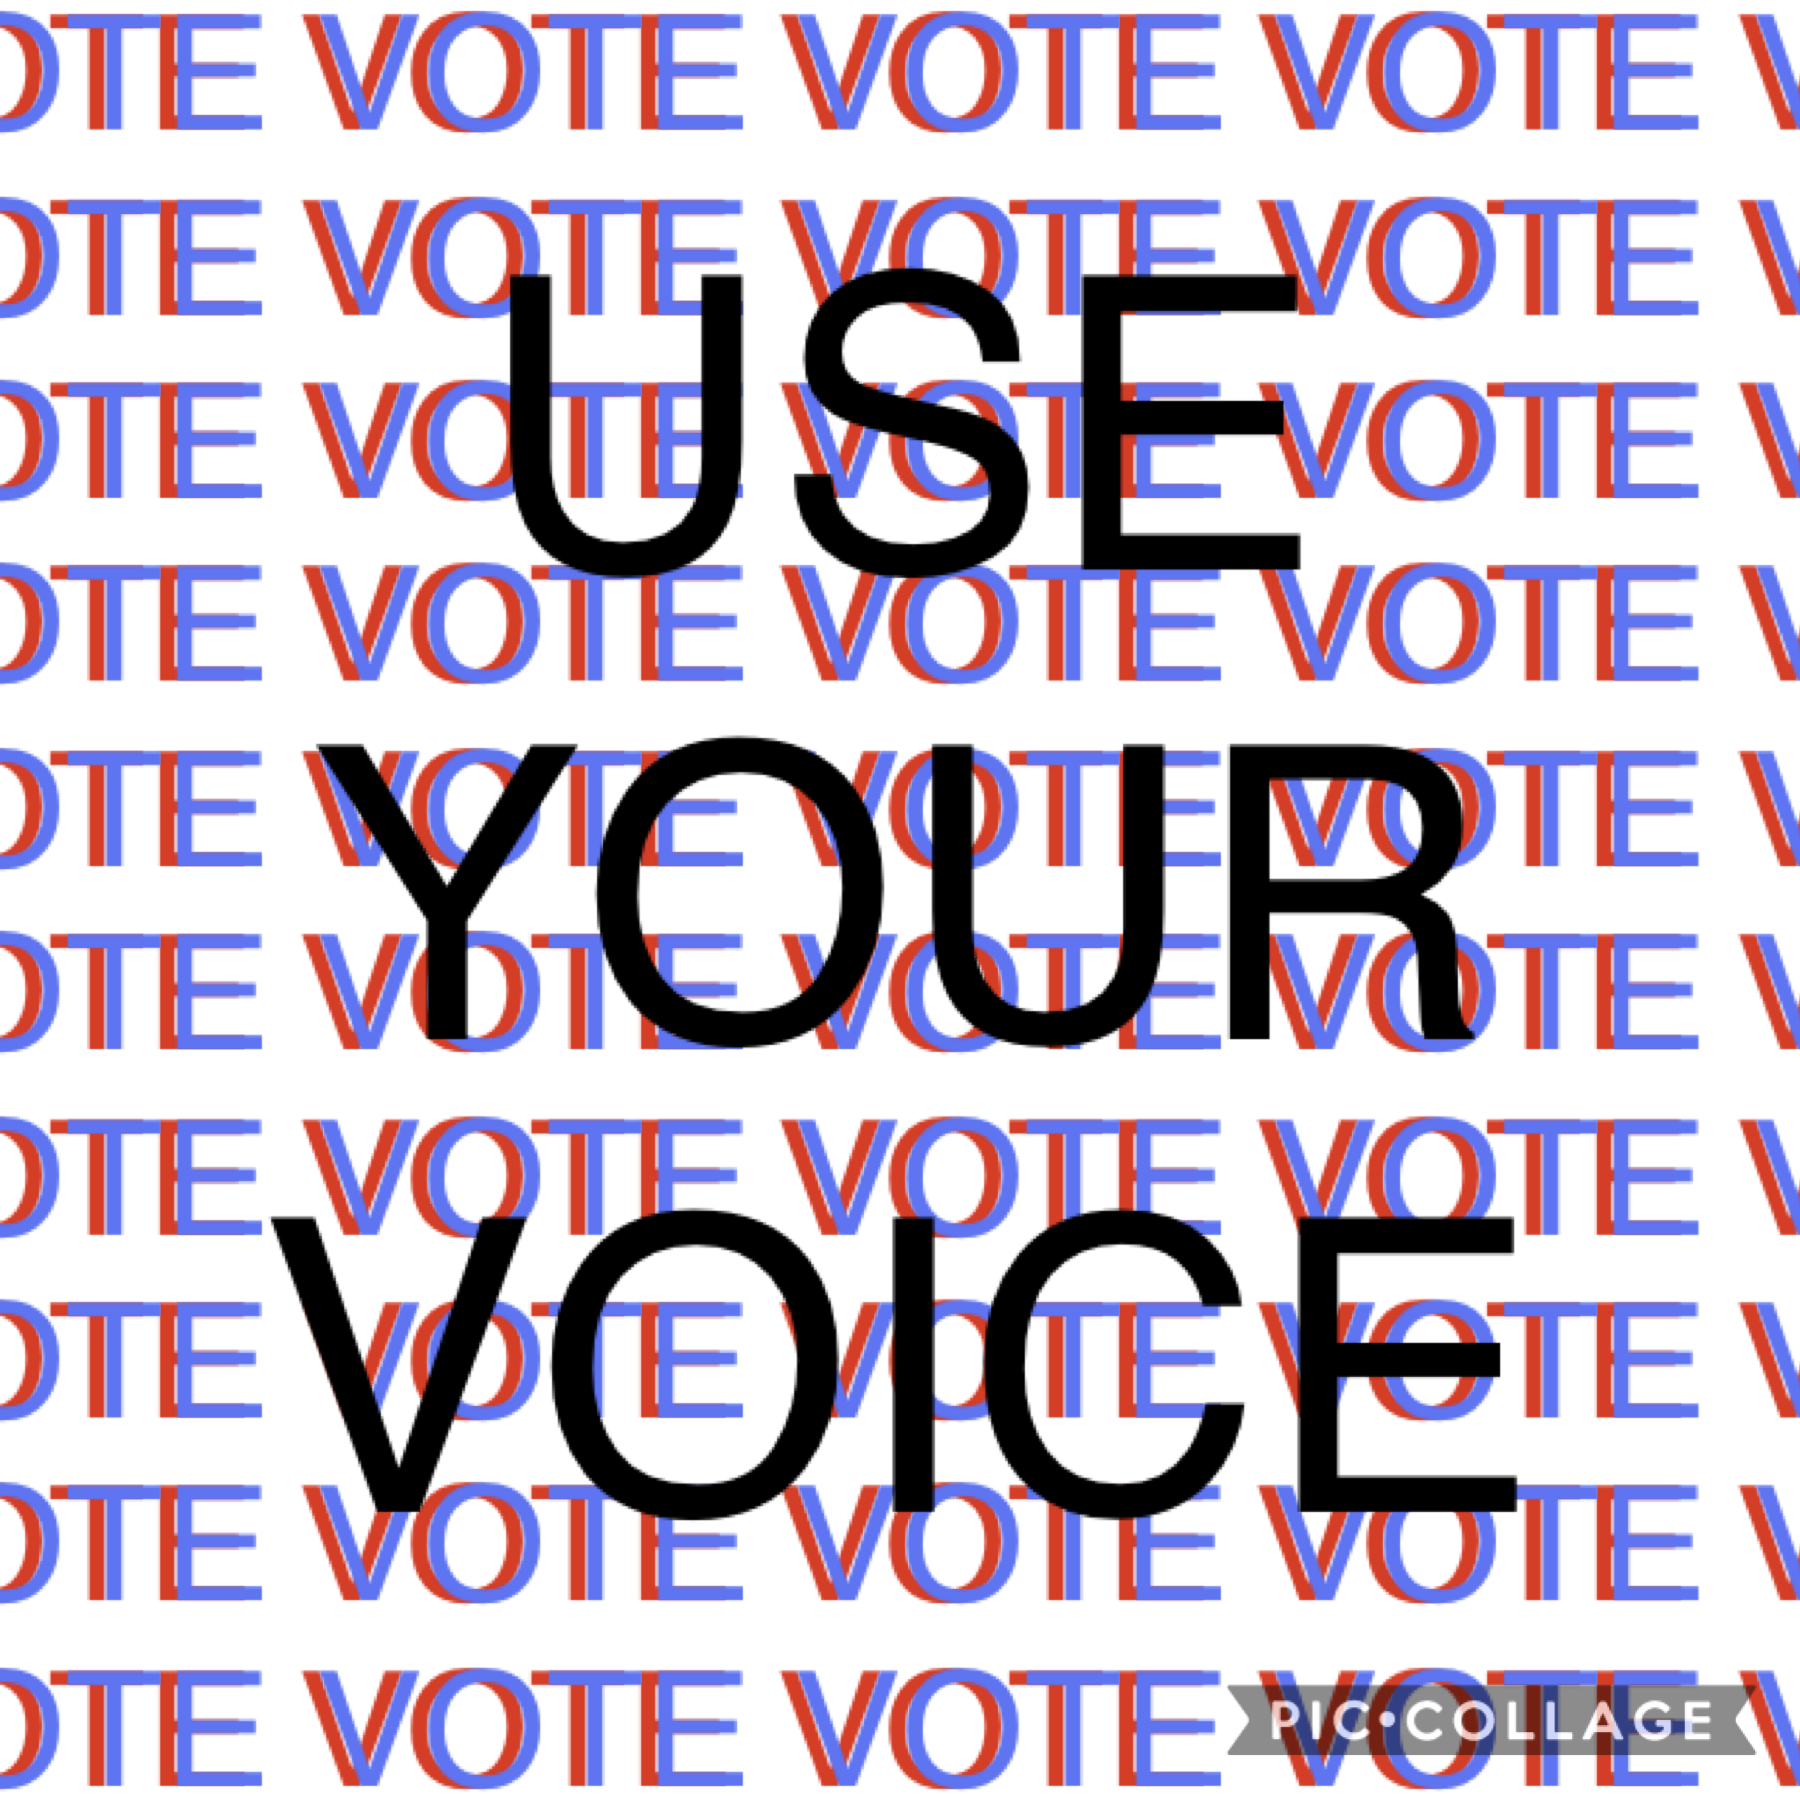 USE YOUR VOICE AND VOTE